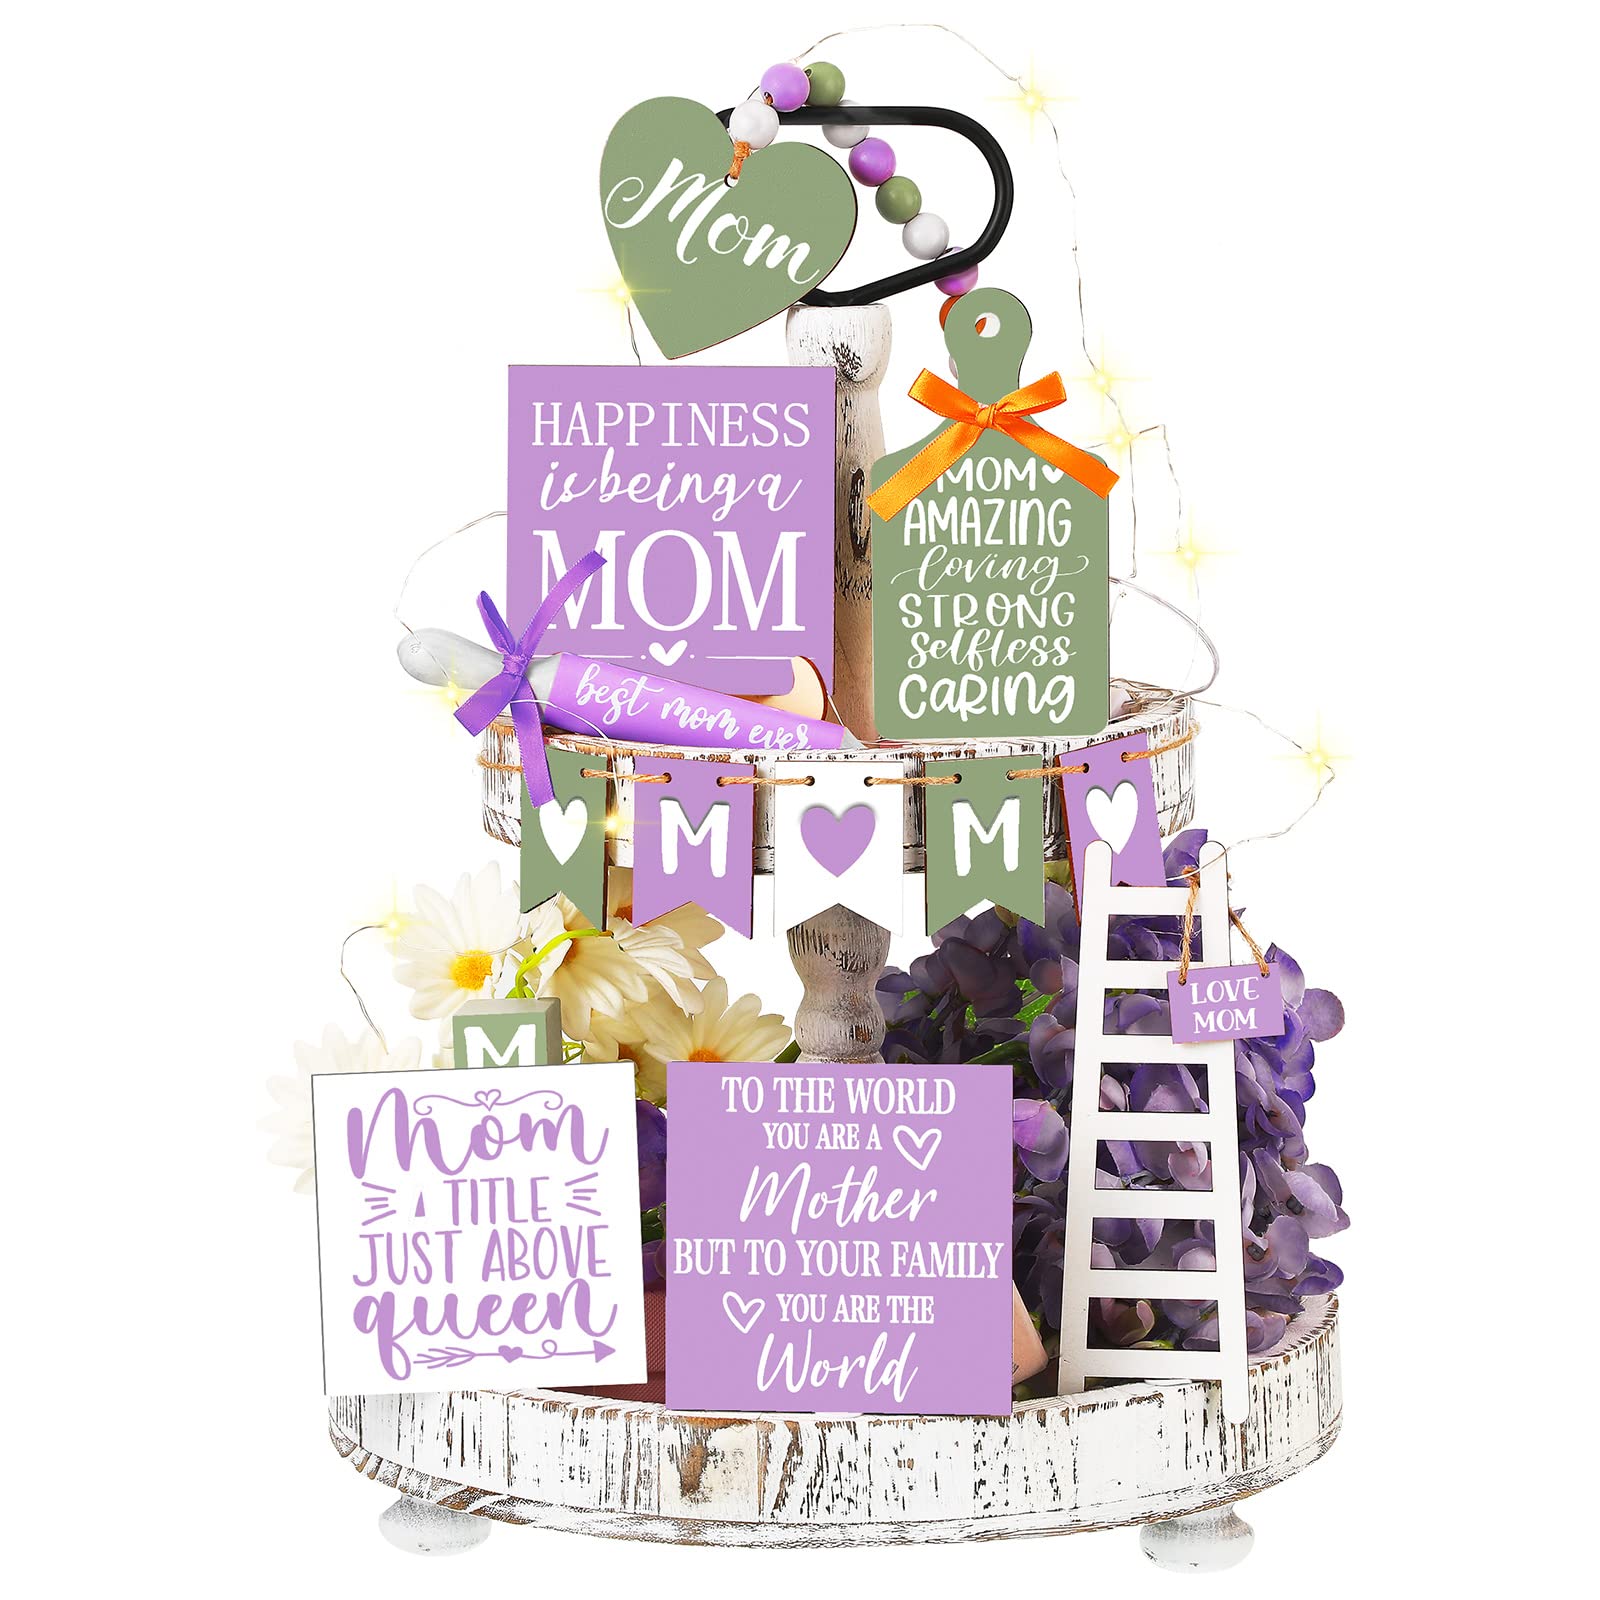 15 Pcs Mother's Day Tiered Tray Decor Happy Mother's Day Lavender Wood Signs Farmhouse Decorations Wooden Heart Bead Garland with LED String Lights for Mothers Gift Tabletop, Purple, Green